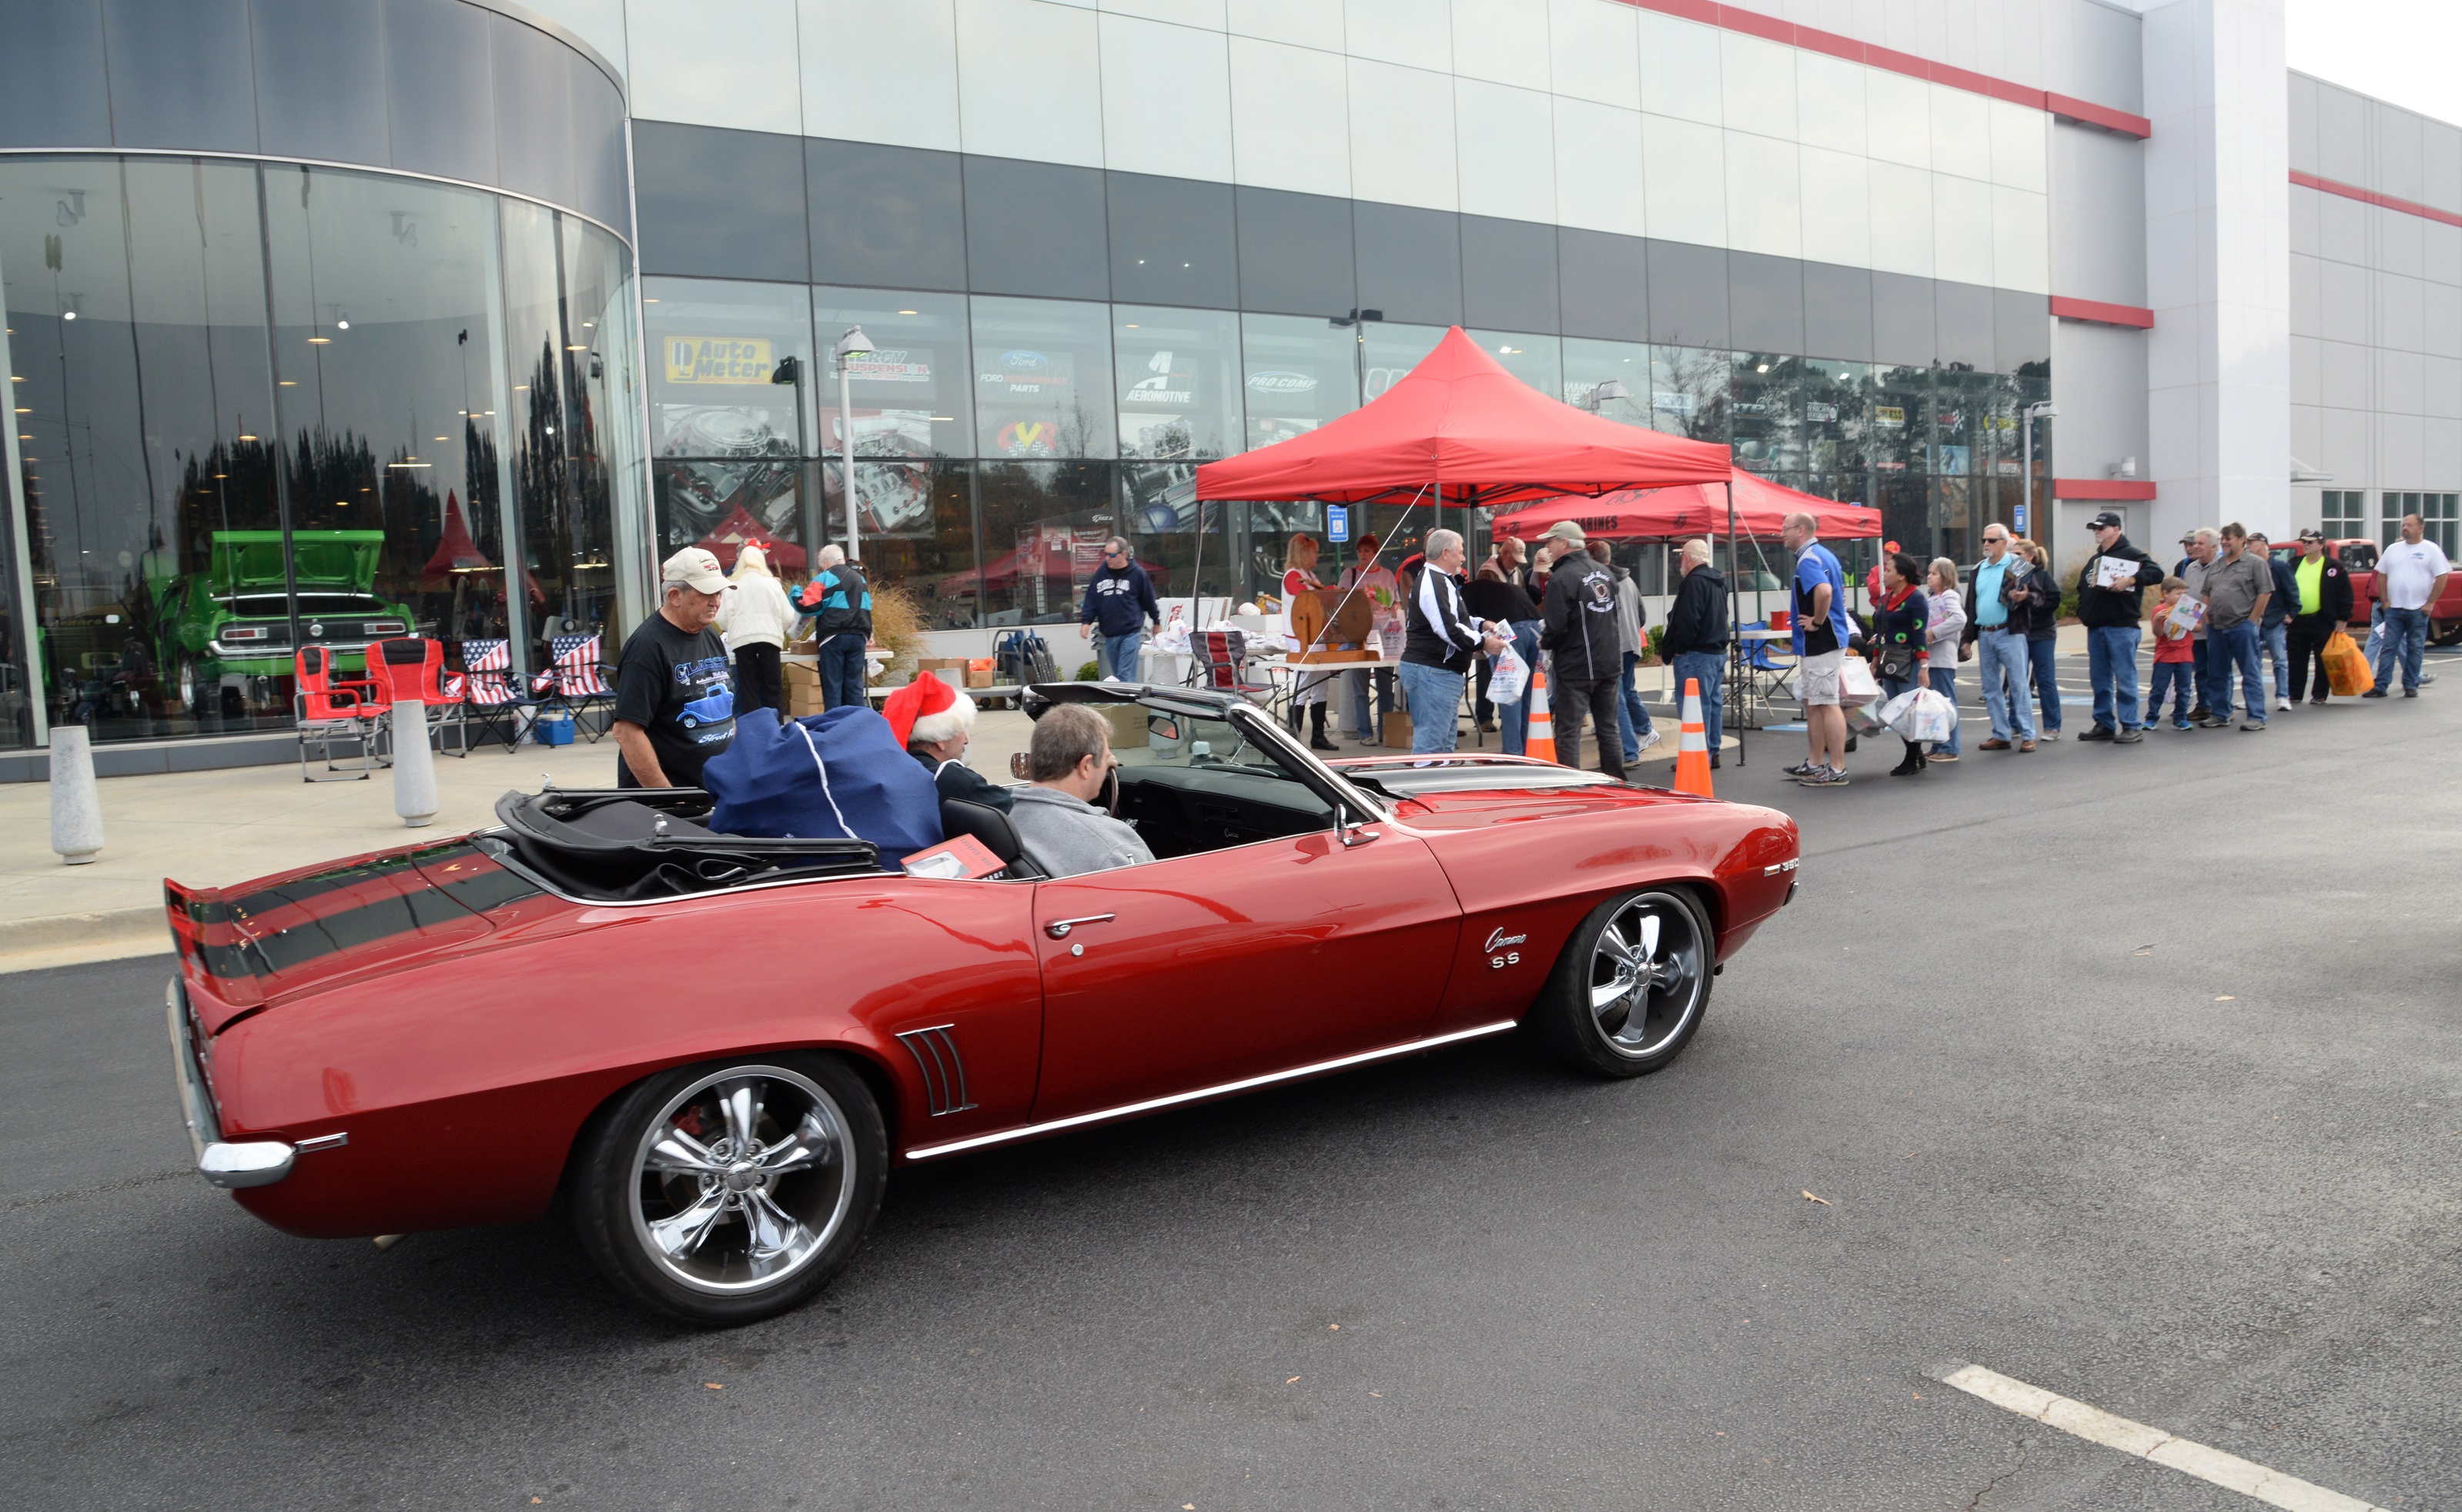 Toys for Tots Cruise In Camaro